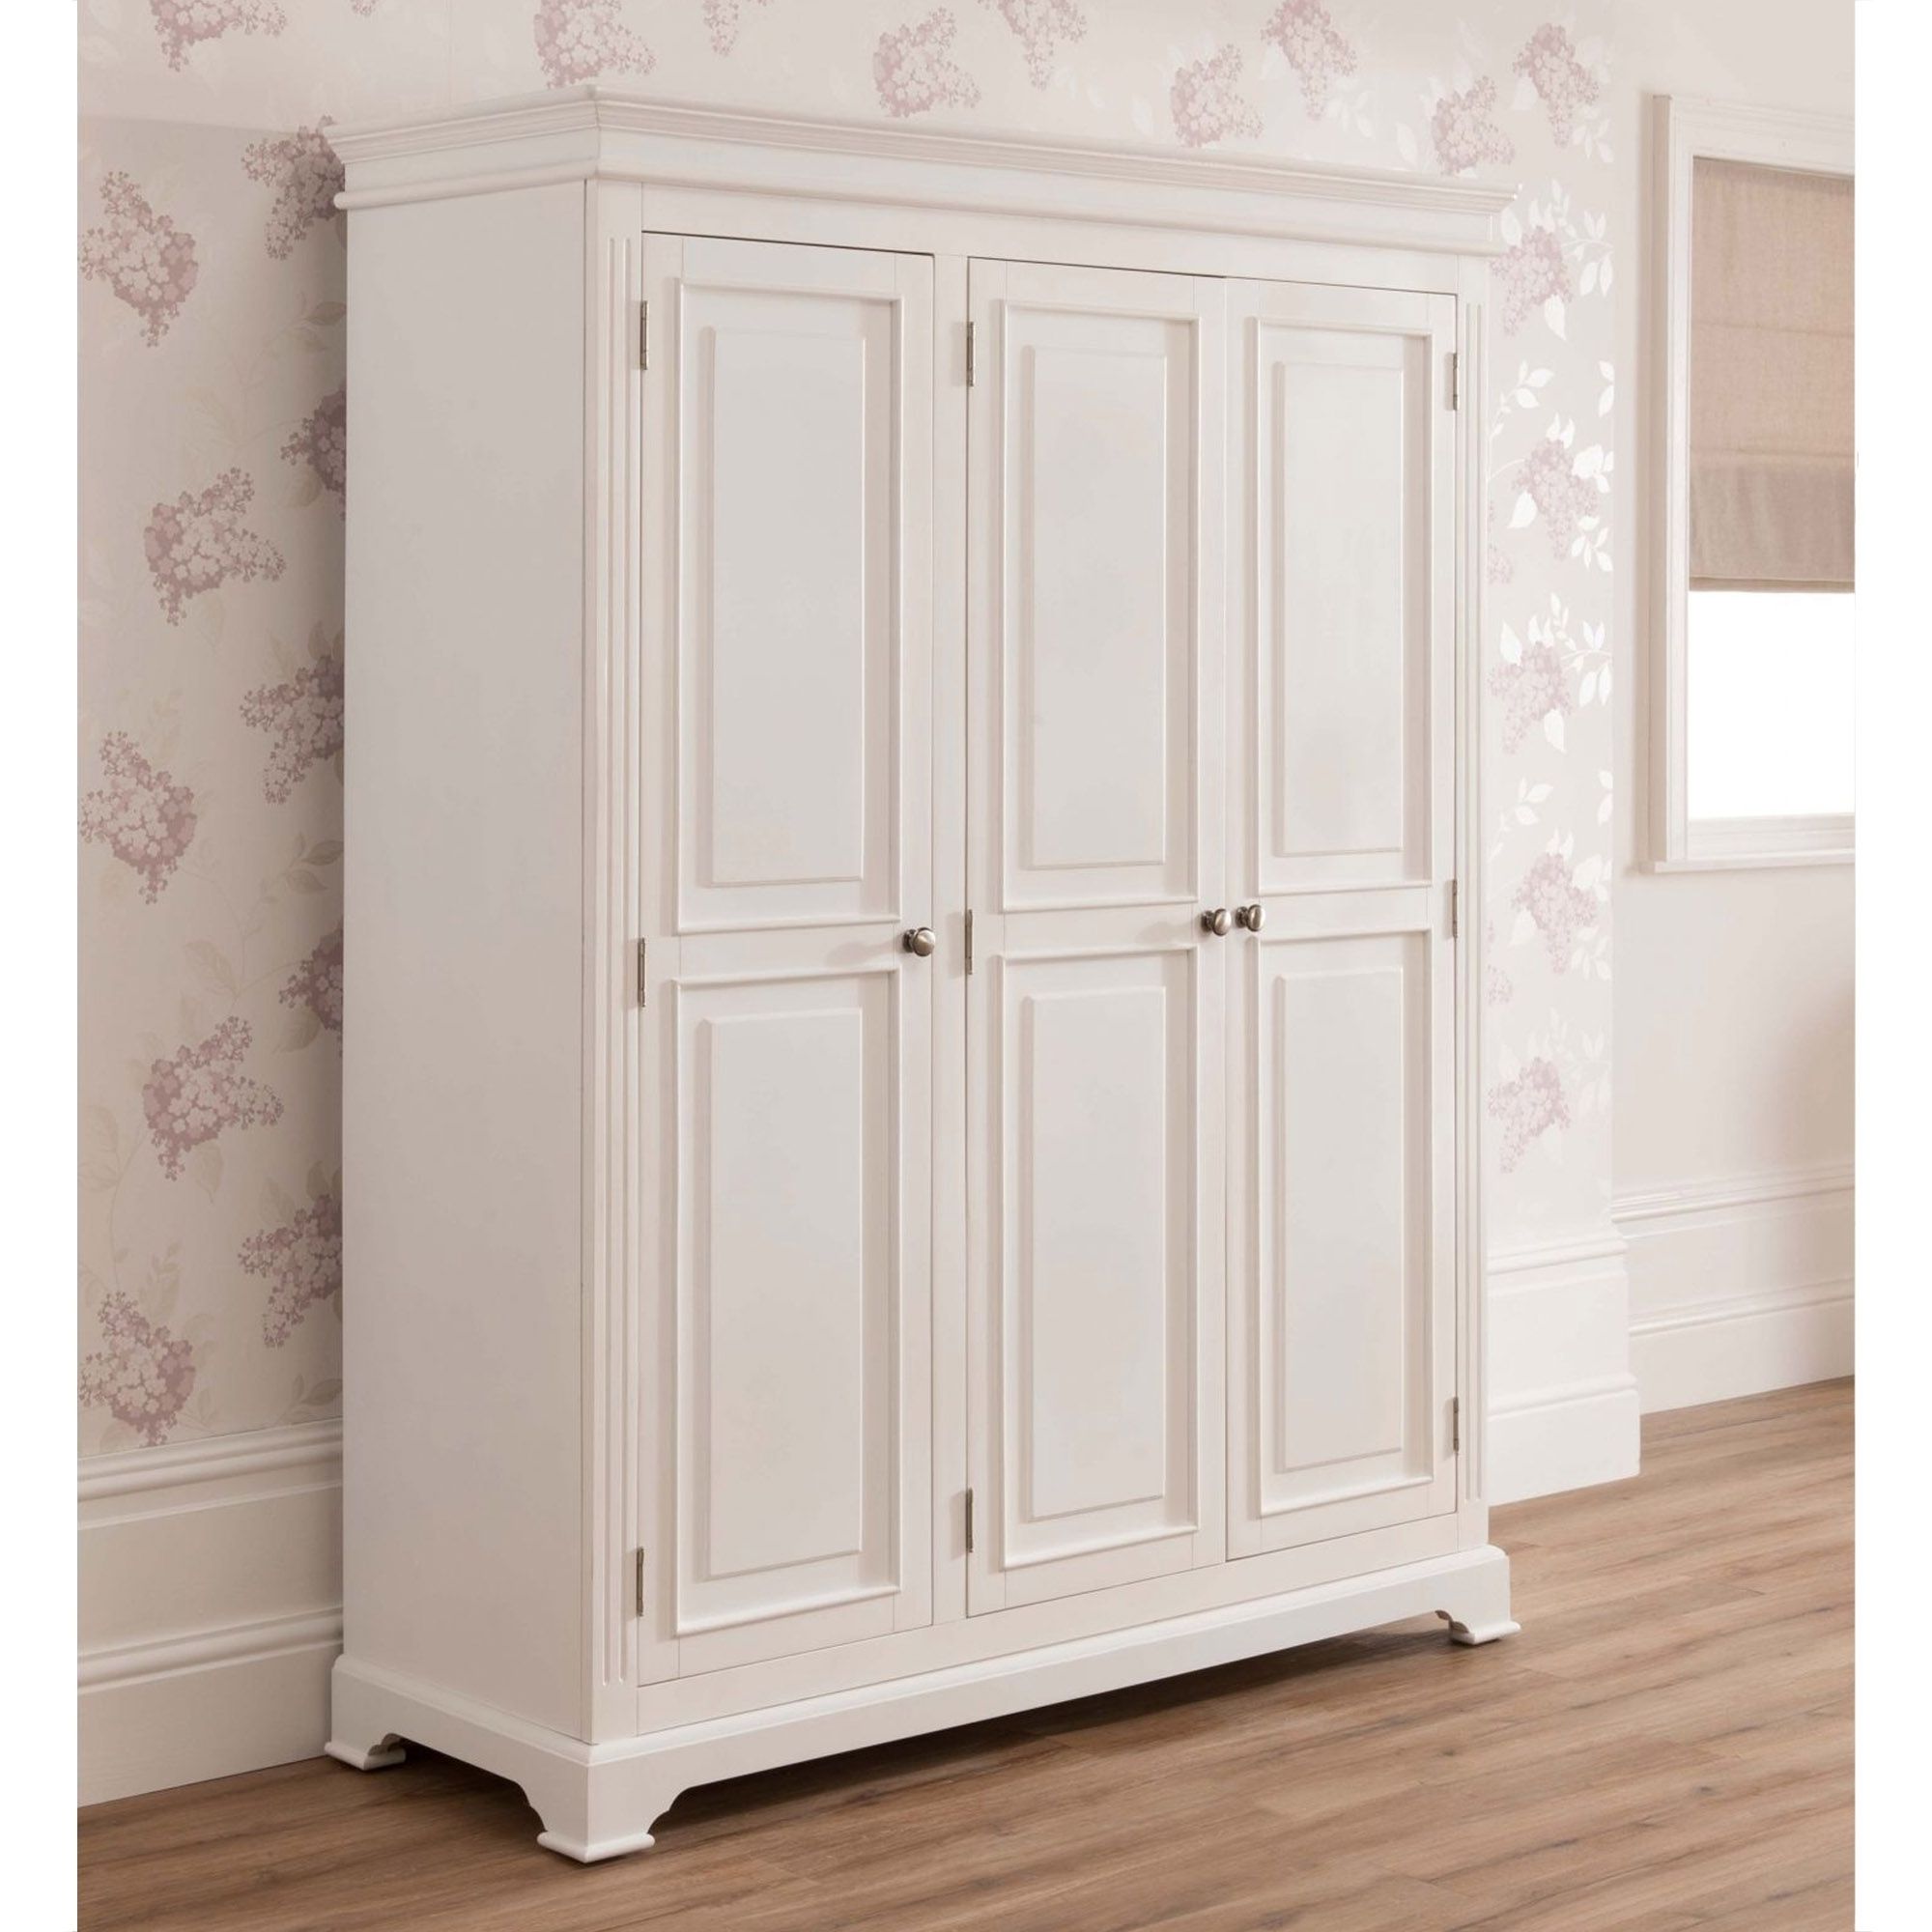 Sophia Shabby Chic Wardrobe Is A Fantastic Addition To Our Antique French  Furniture Inside Chic Wardrobes (Gallery 3 of 20)